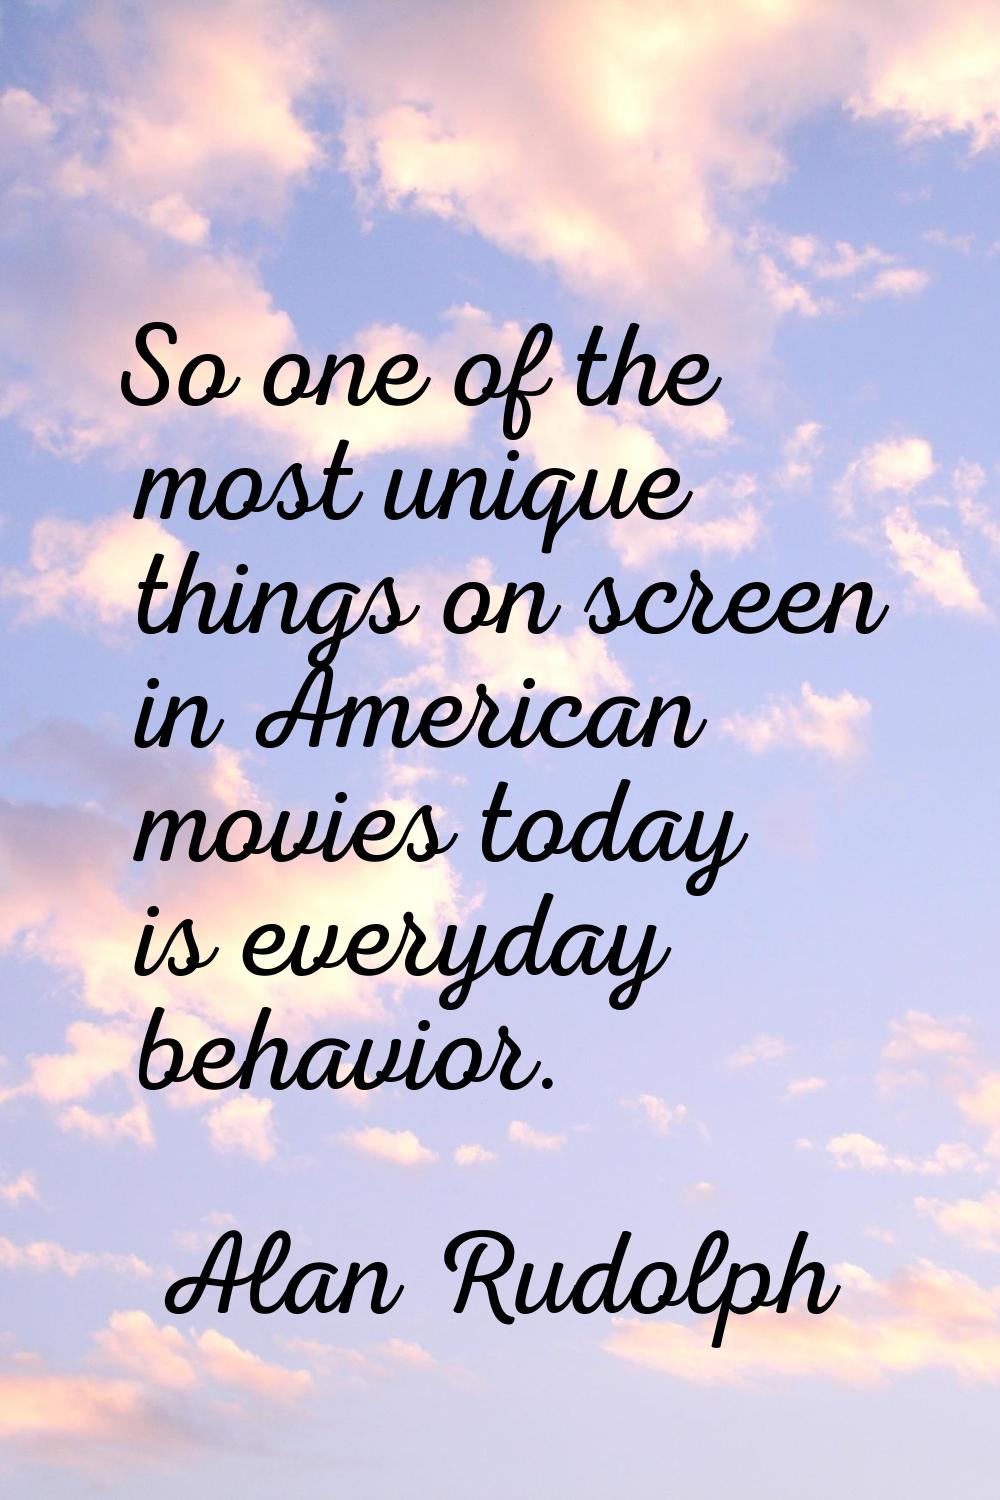 So one of the most unique things on screen in American movies today is everyday behavior.